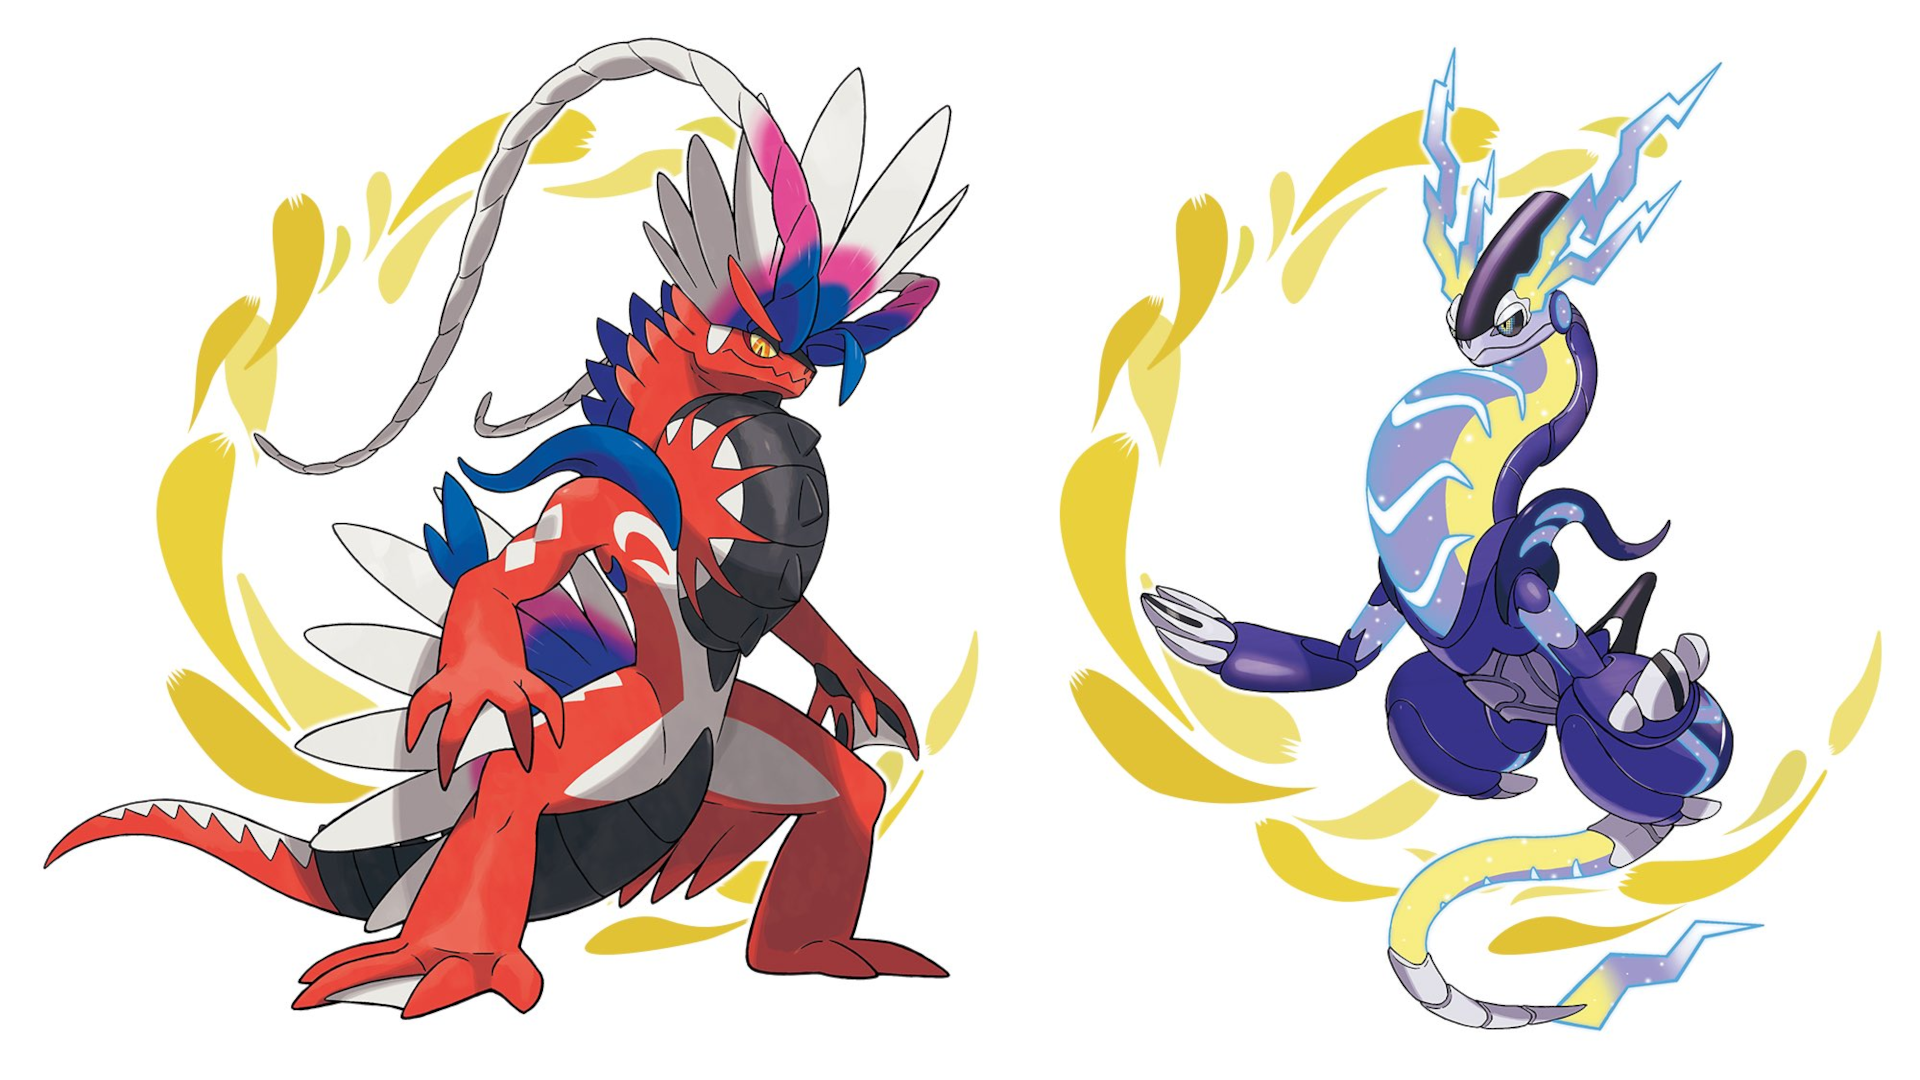 The two legendary Pokémon from 'Scarlet and Violet' are shown.